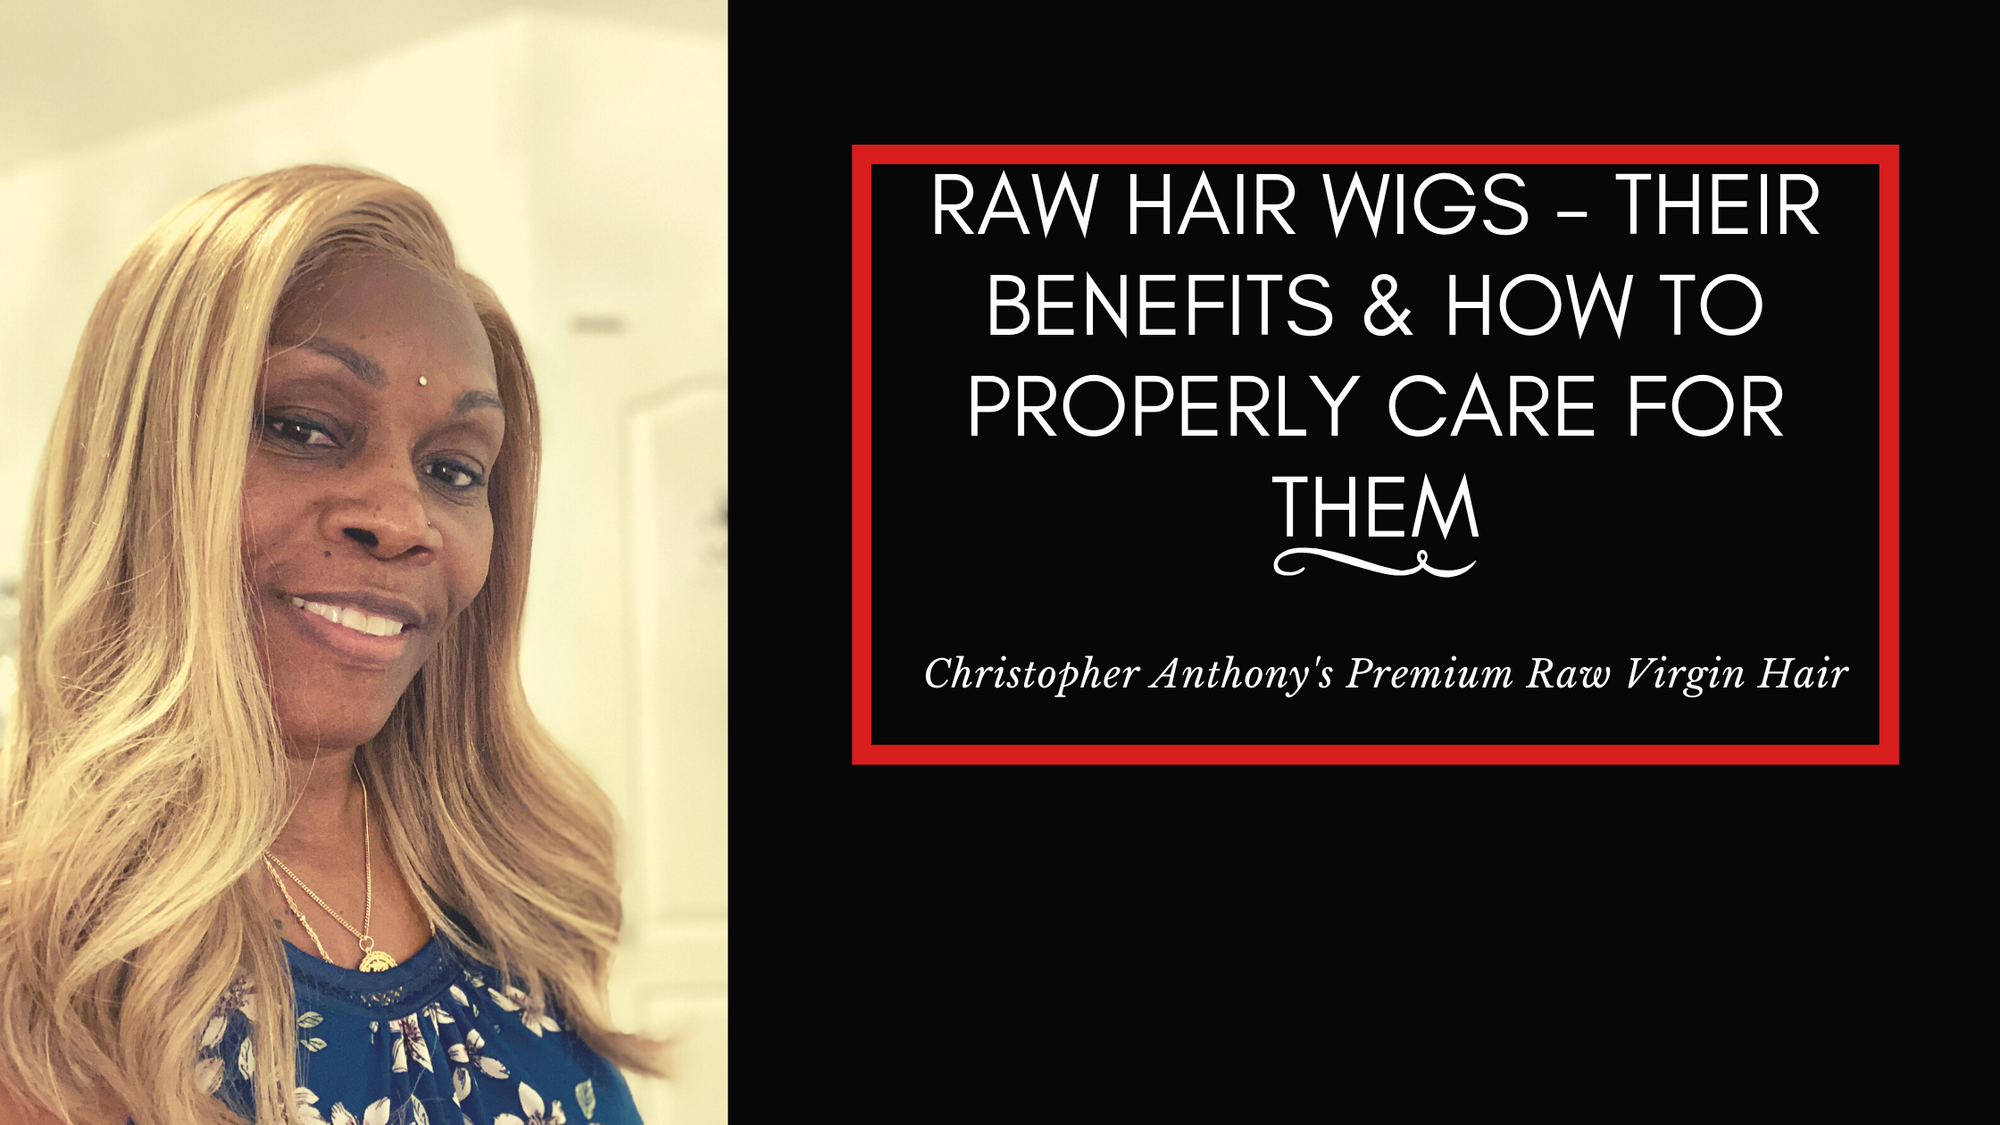 Raw Hair Wigs - Their Benefits & How To Properly Care For Them